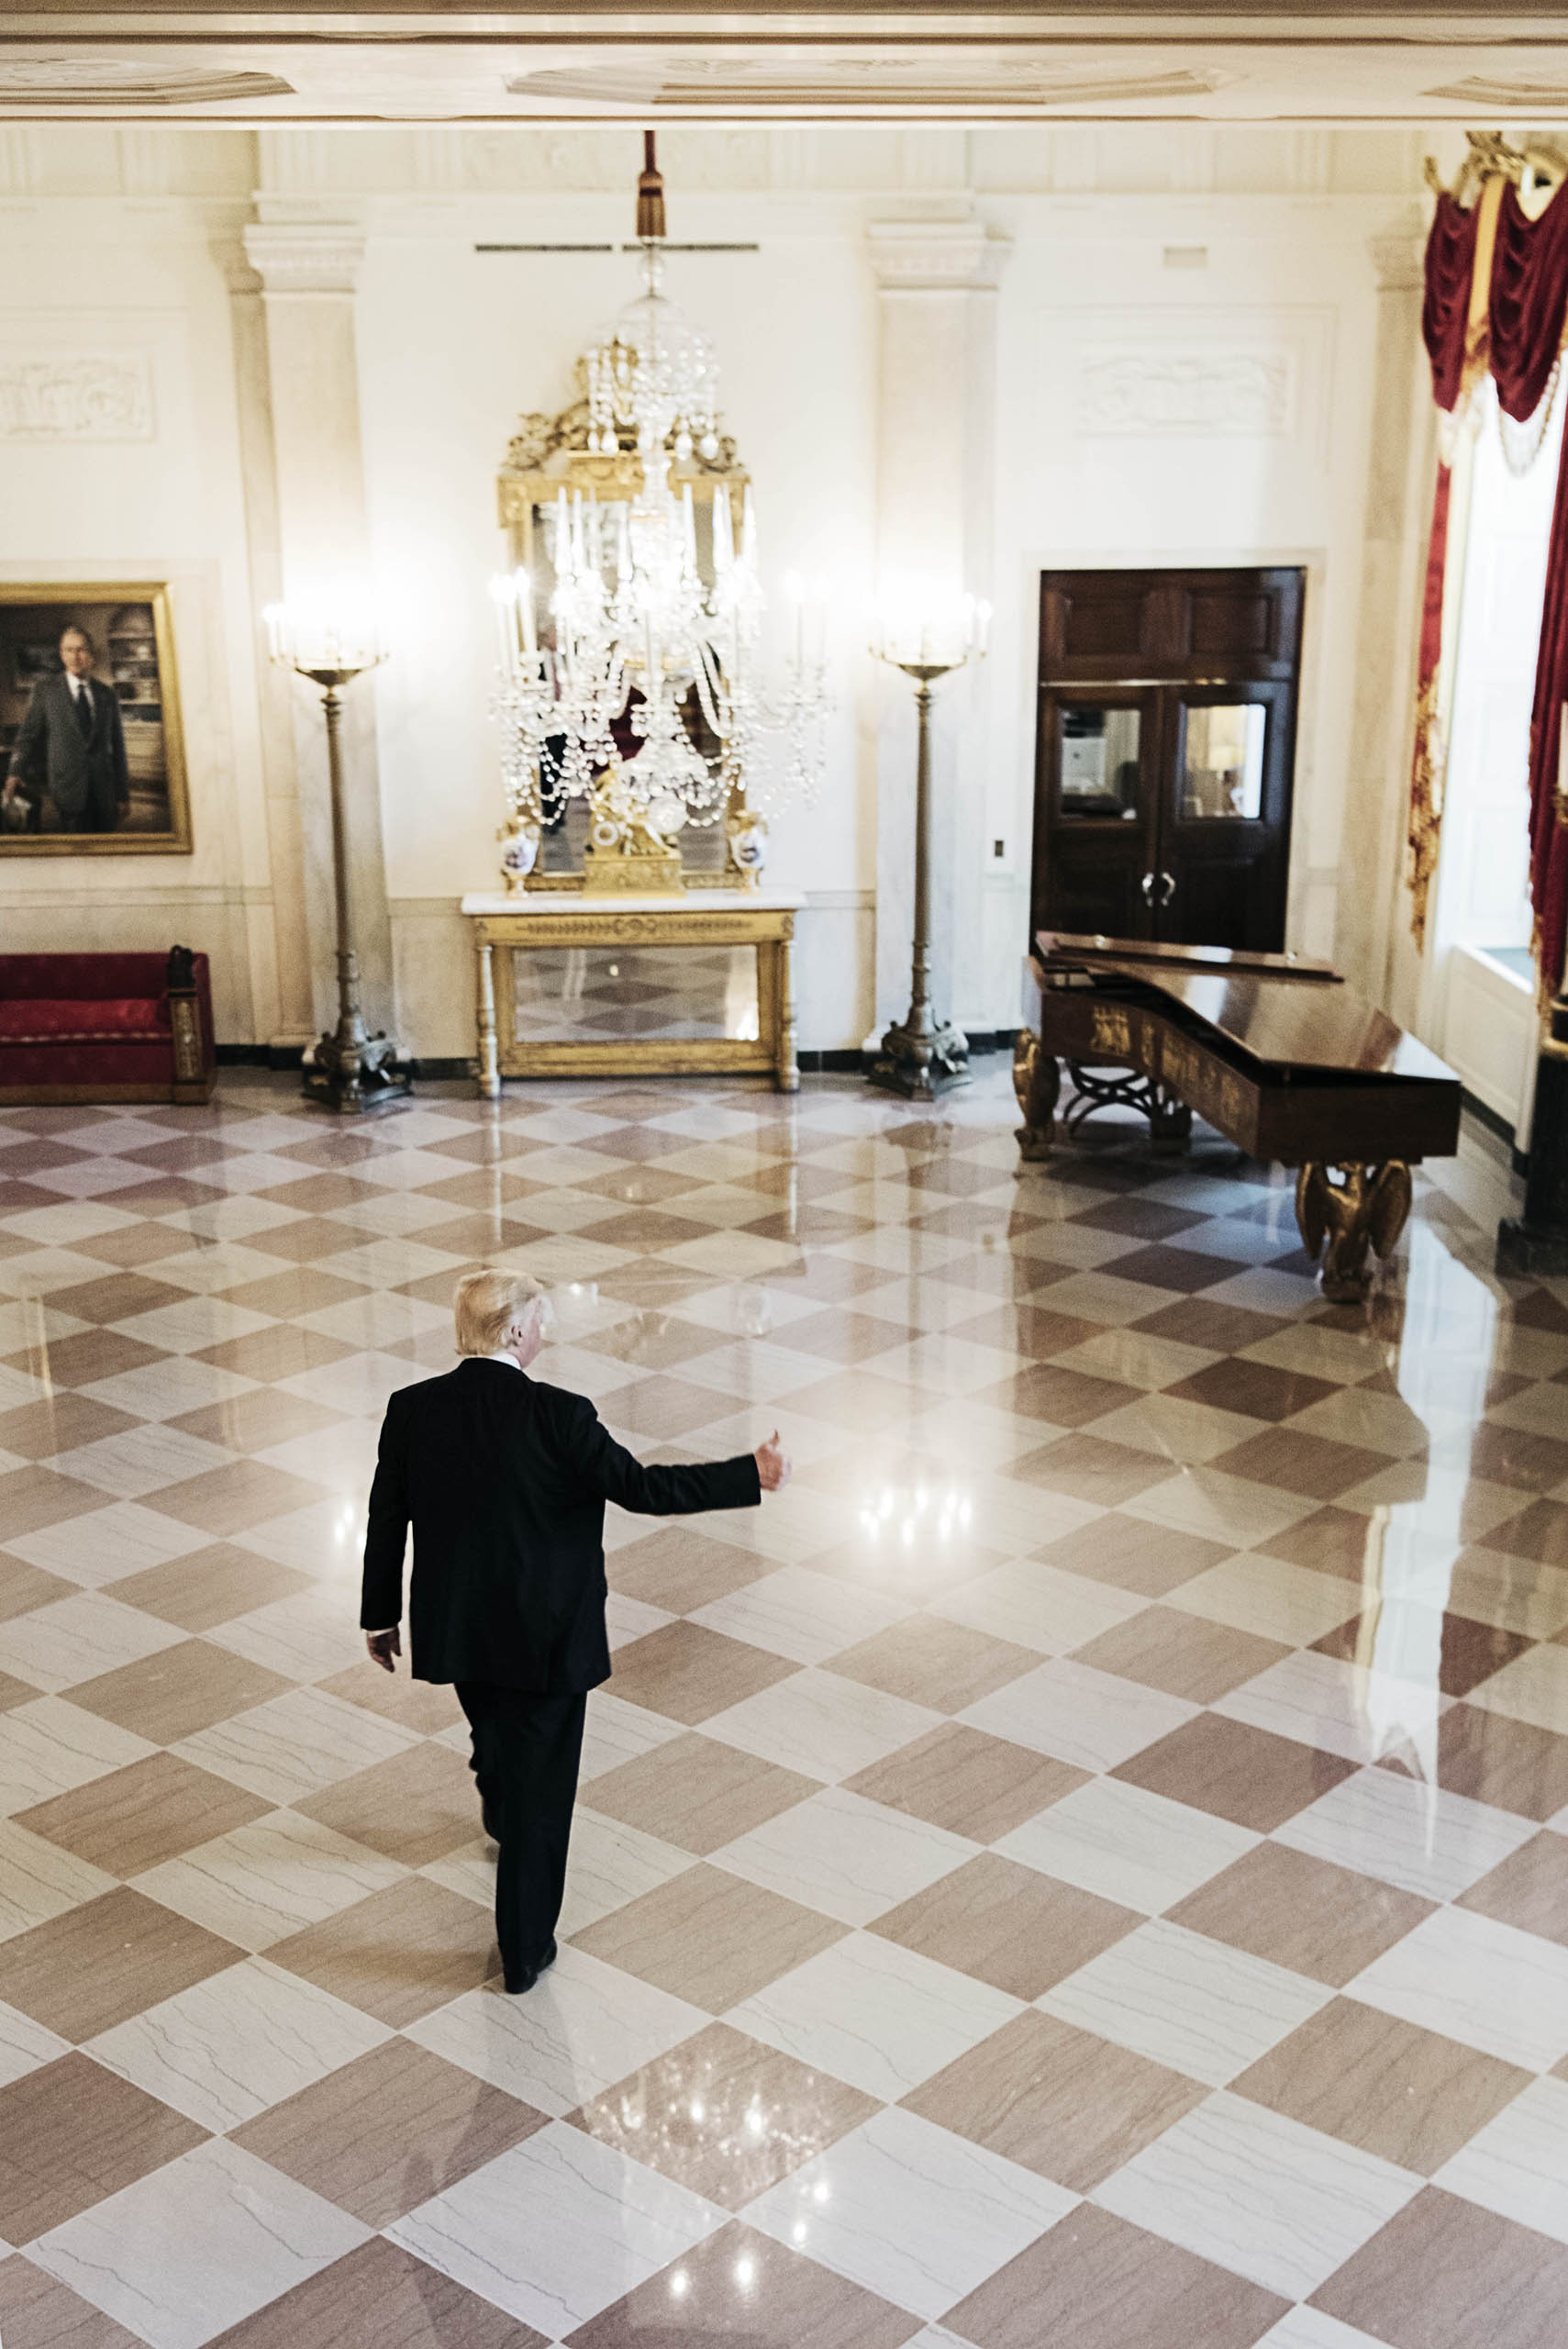 President Trump in the Grand Foyer of the White House, Washington, D.C., May 8, 2017.